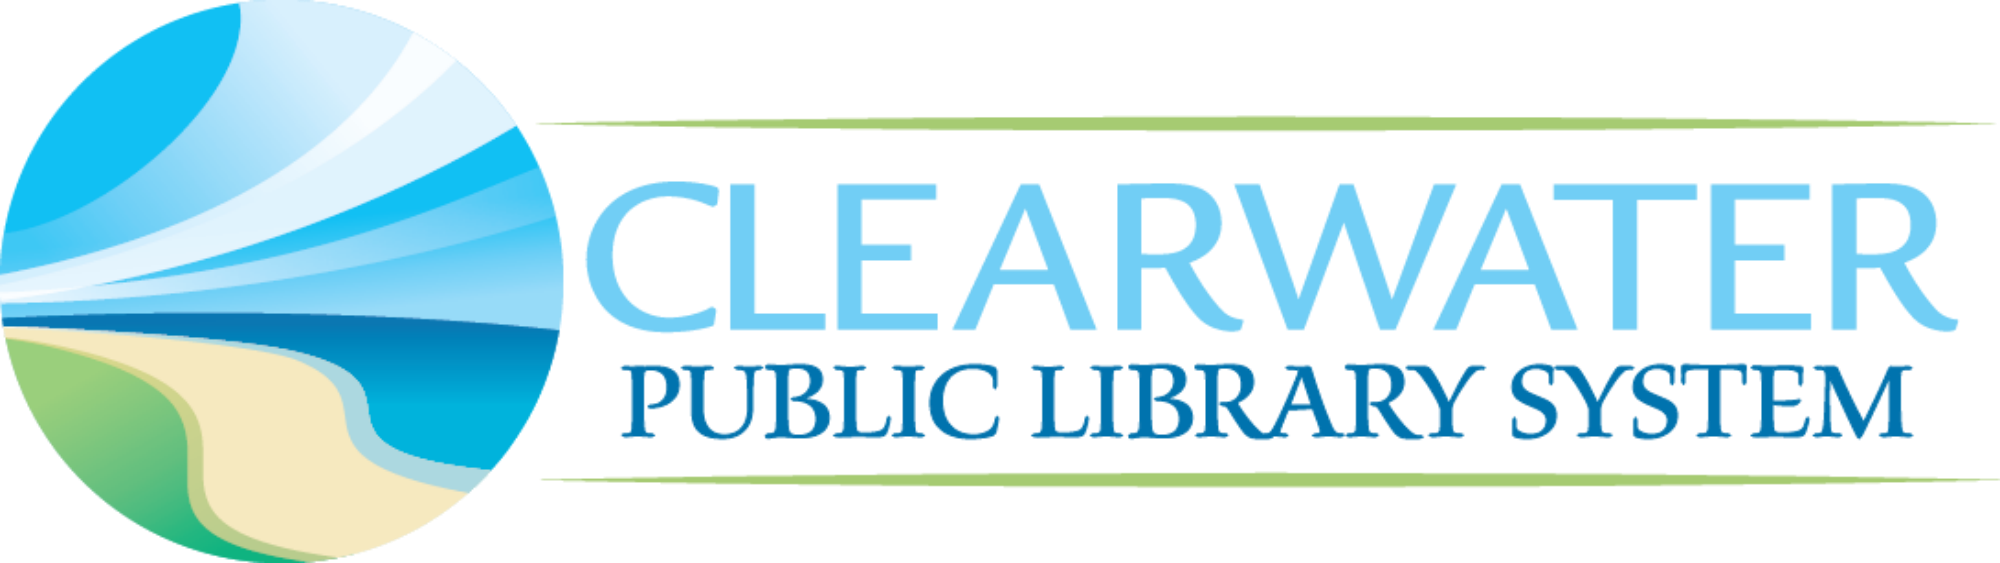 Clearwater Library Logo (Transparent Horizontal)